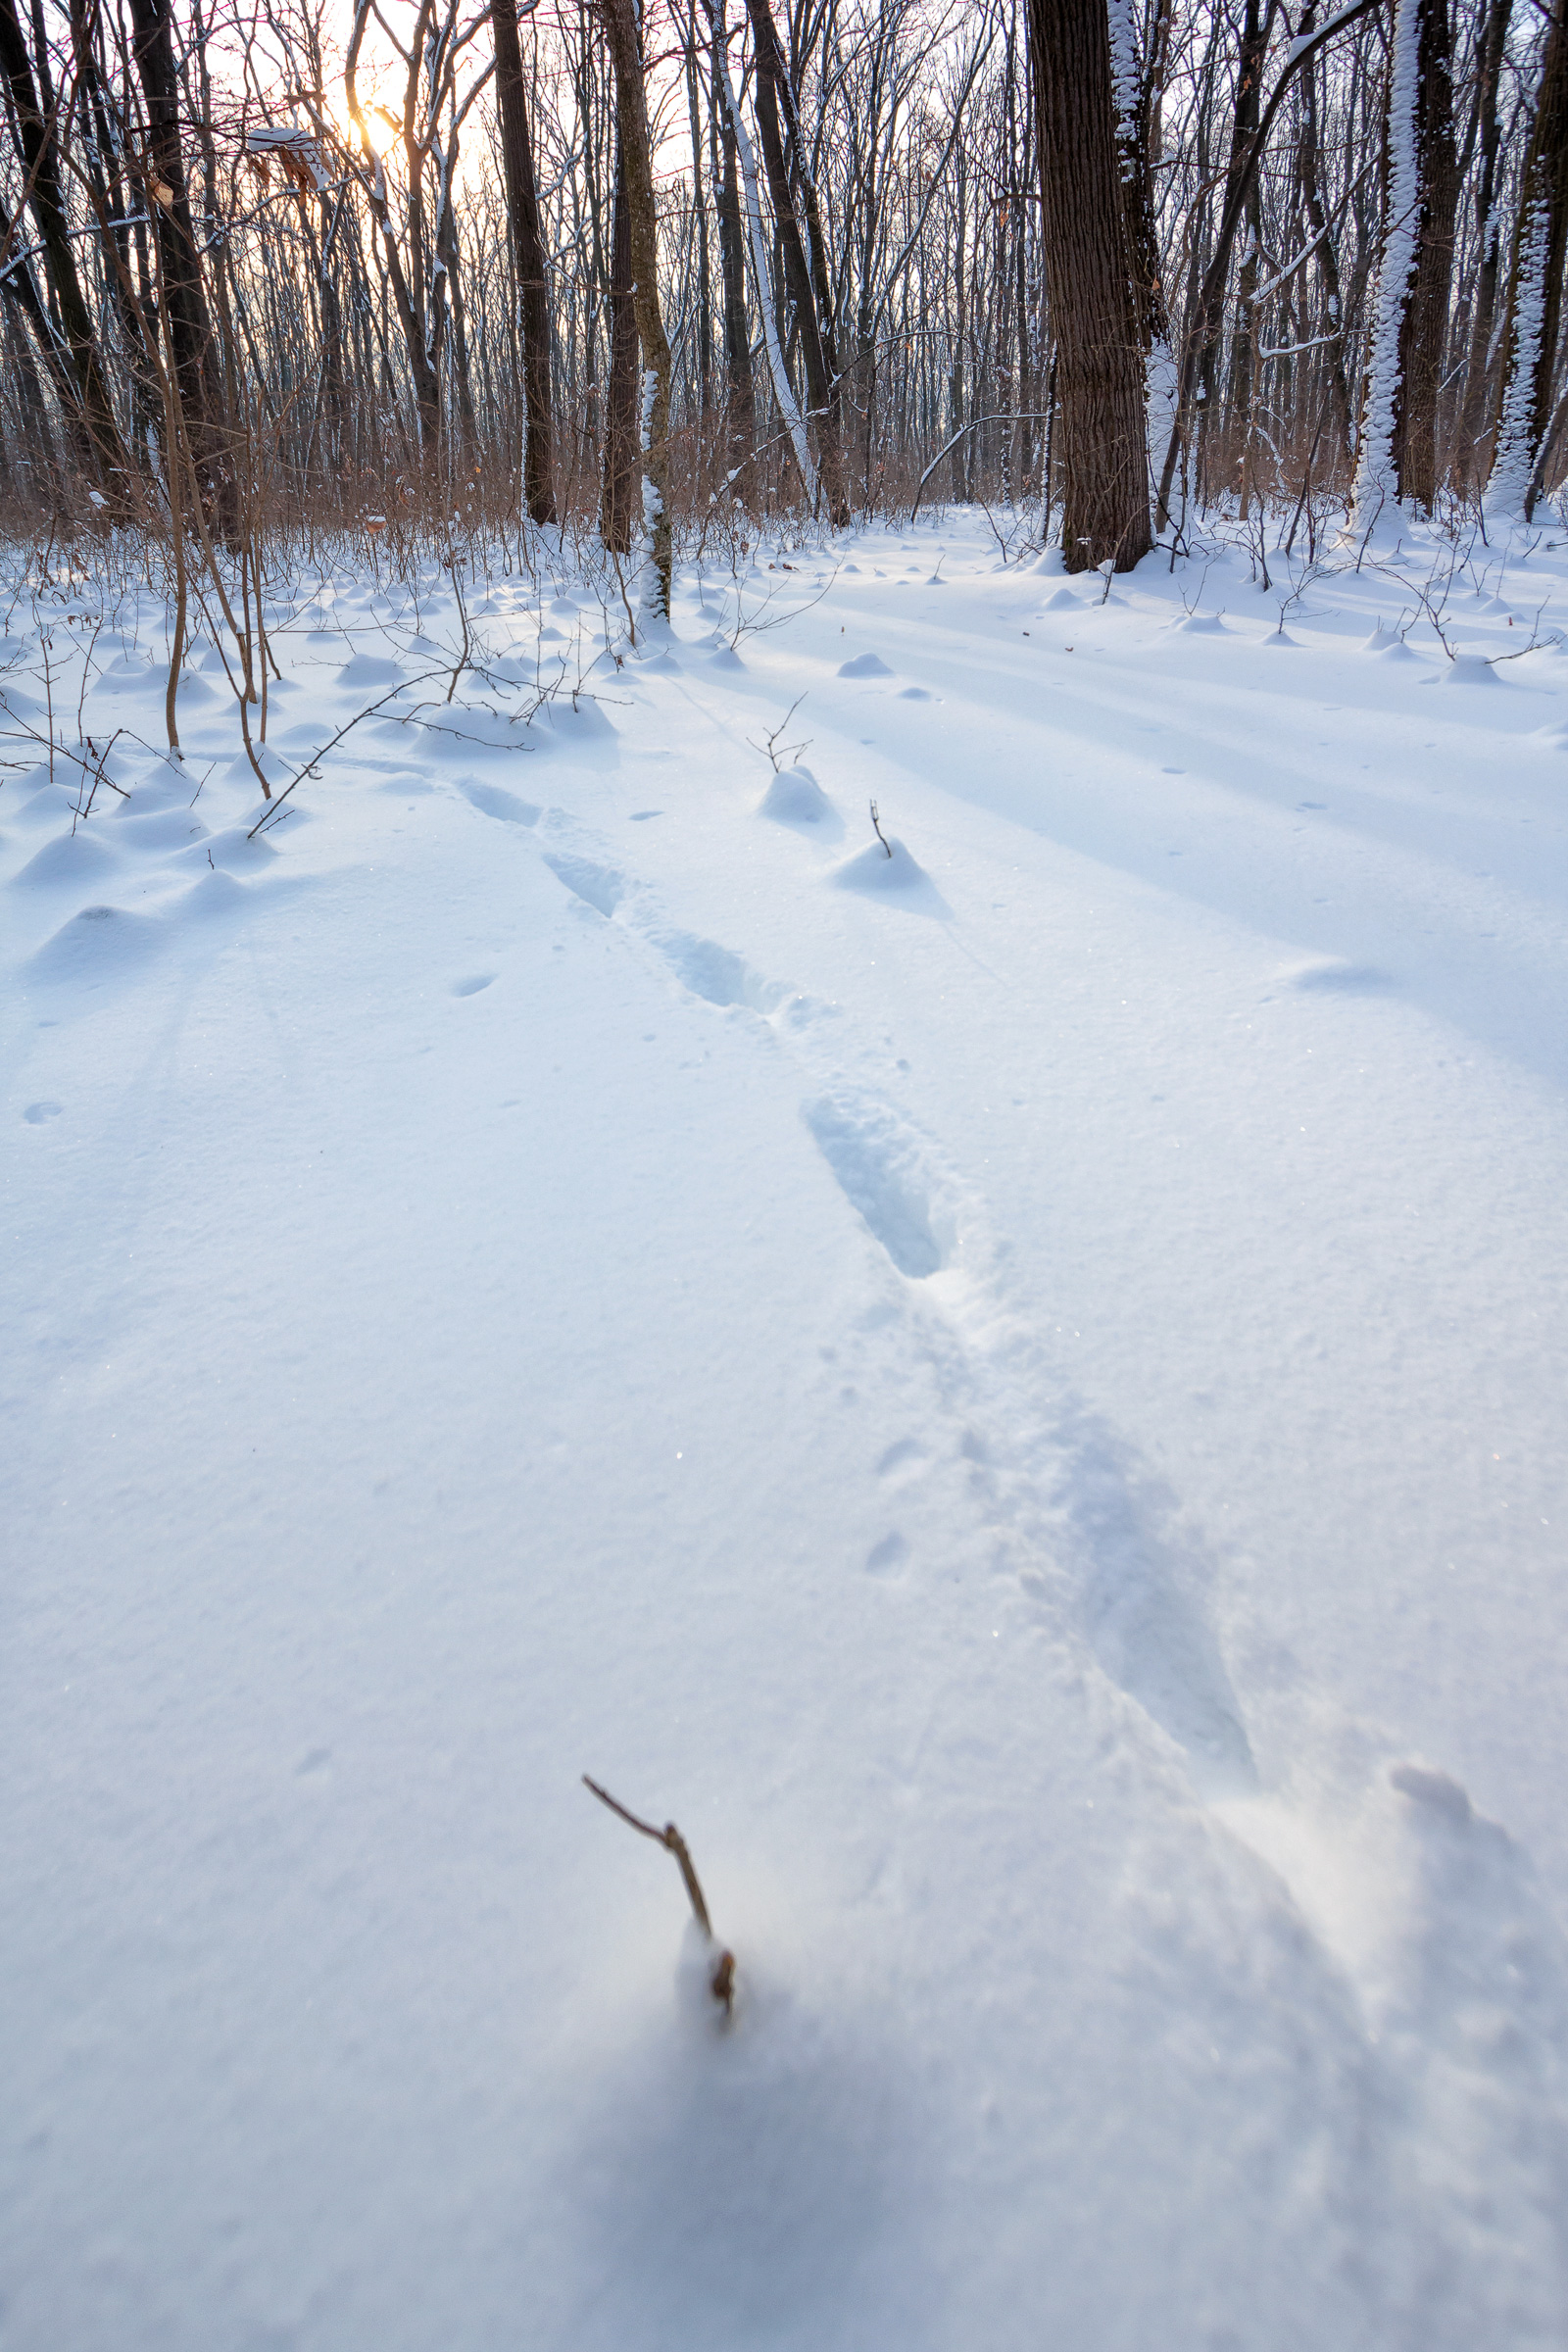 Animal track in the winter forest